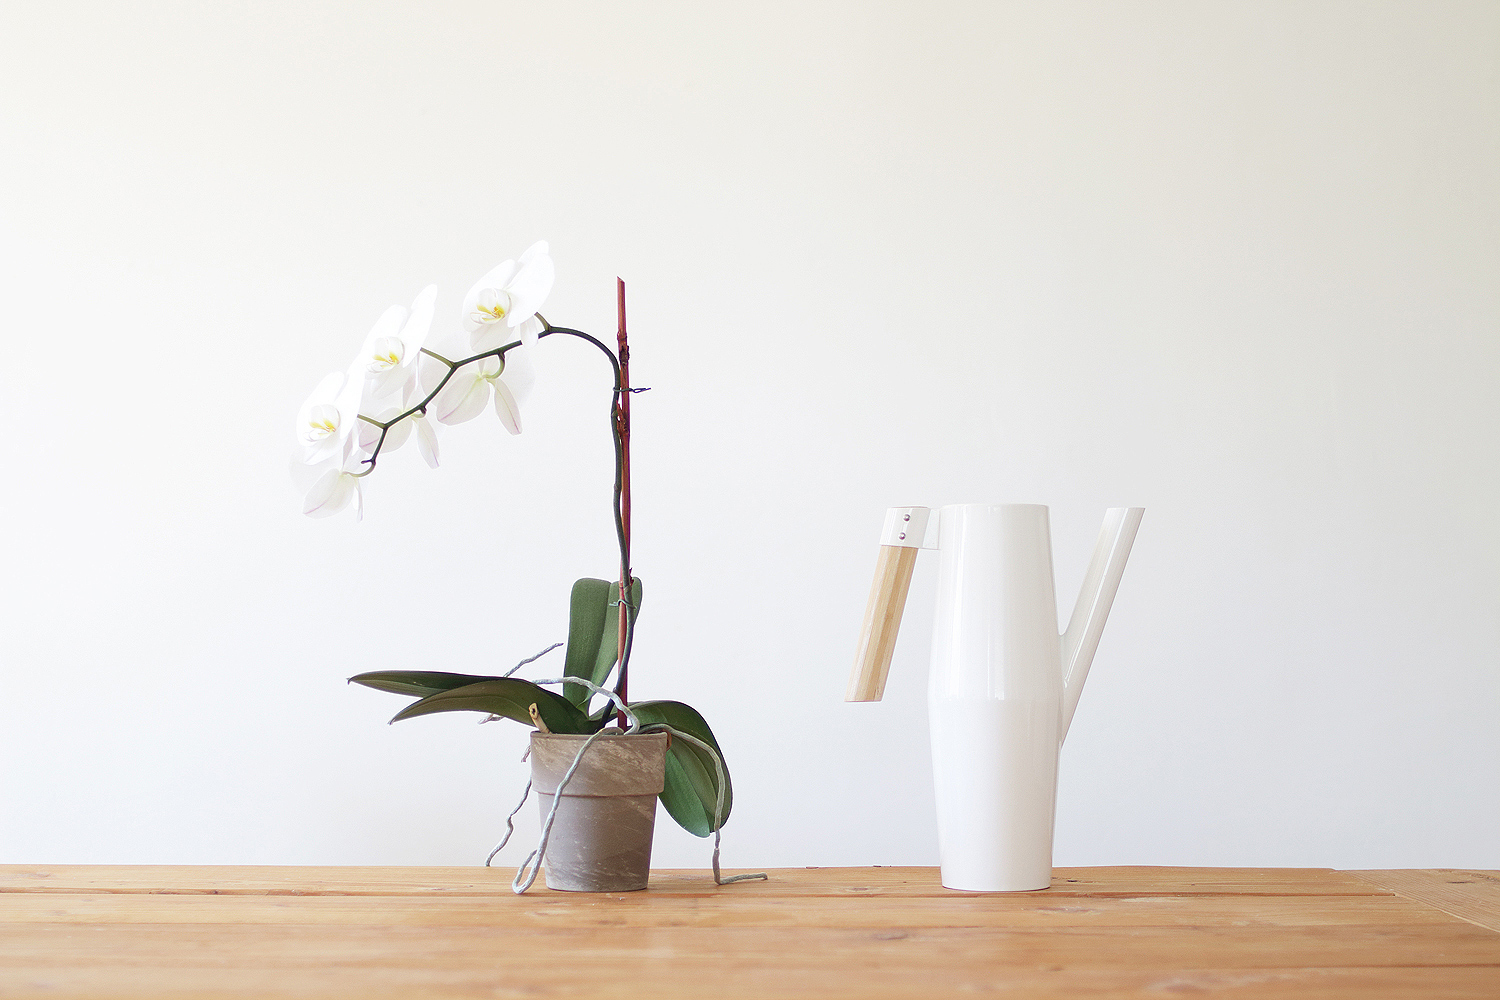 Minimalism Doesn’t Mean Your Home Has to Look Like a Barren Wasteland